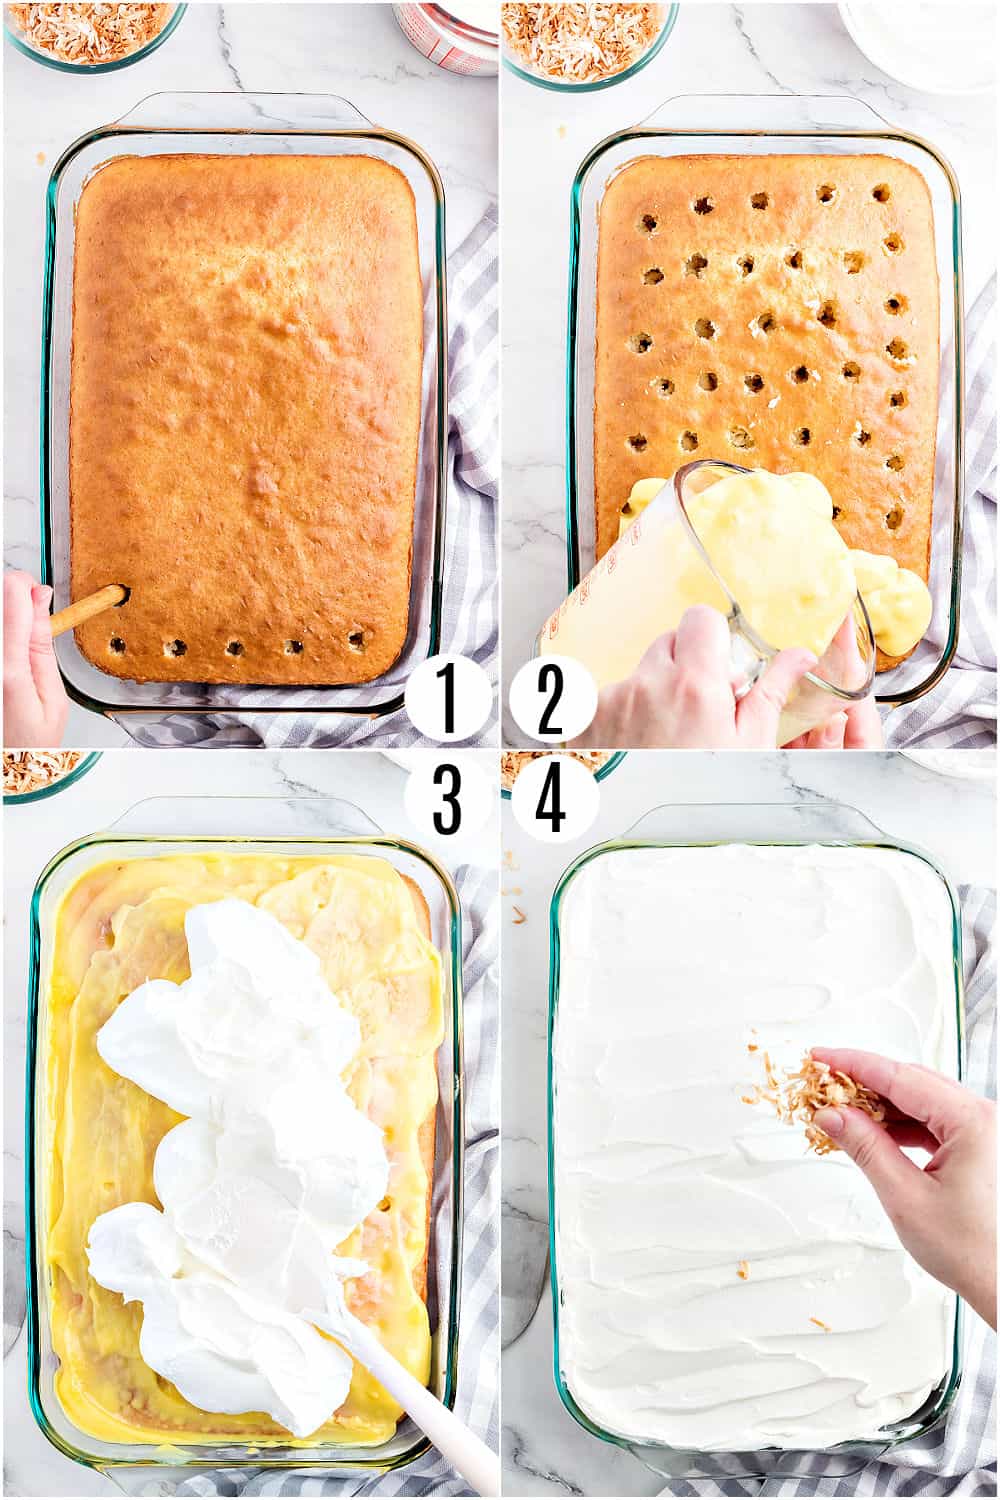 Step by step photos showing how to make coconut pudding cake.